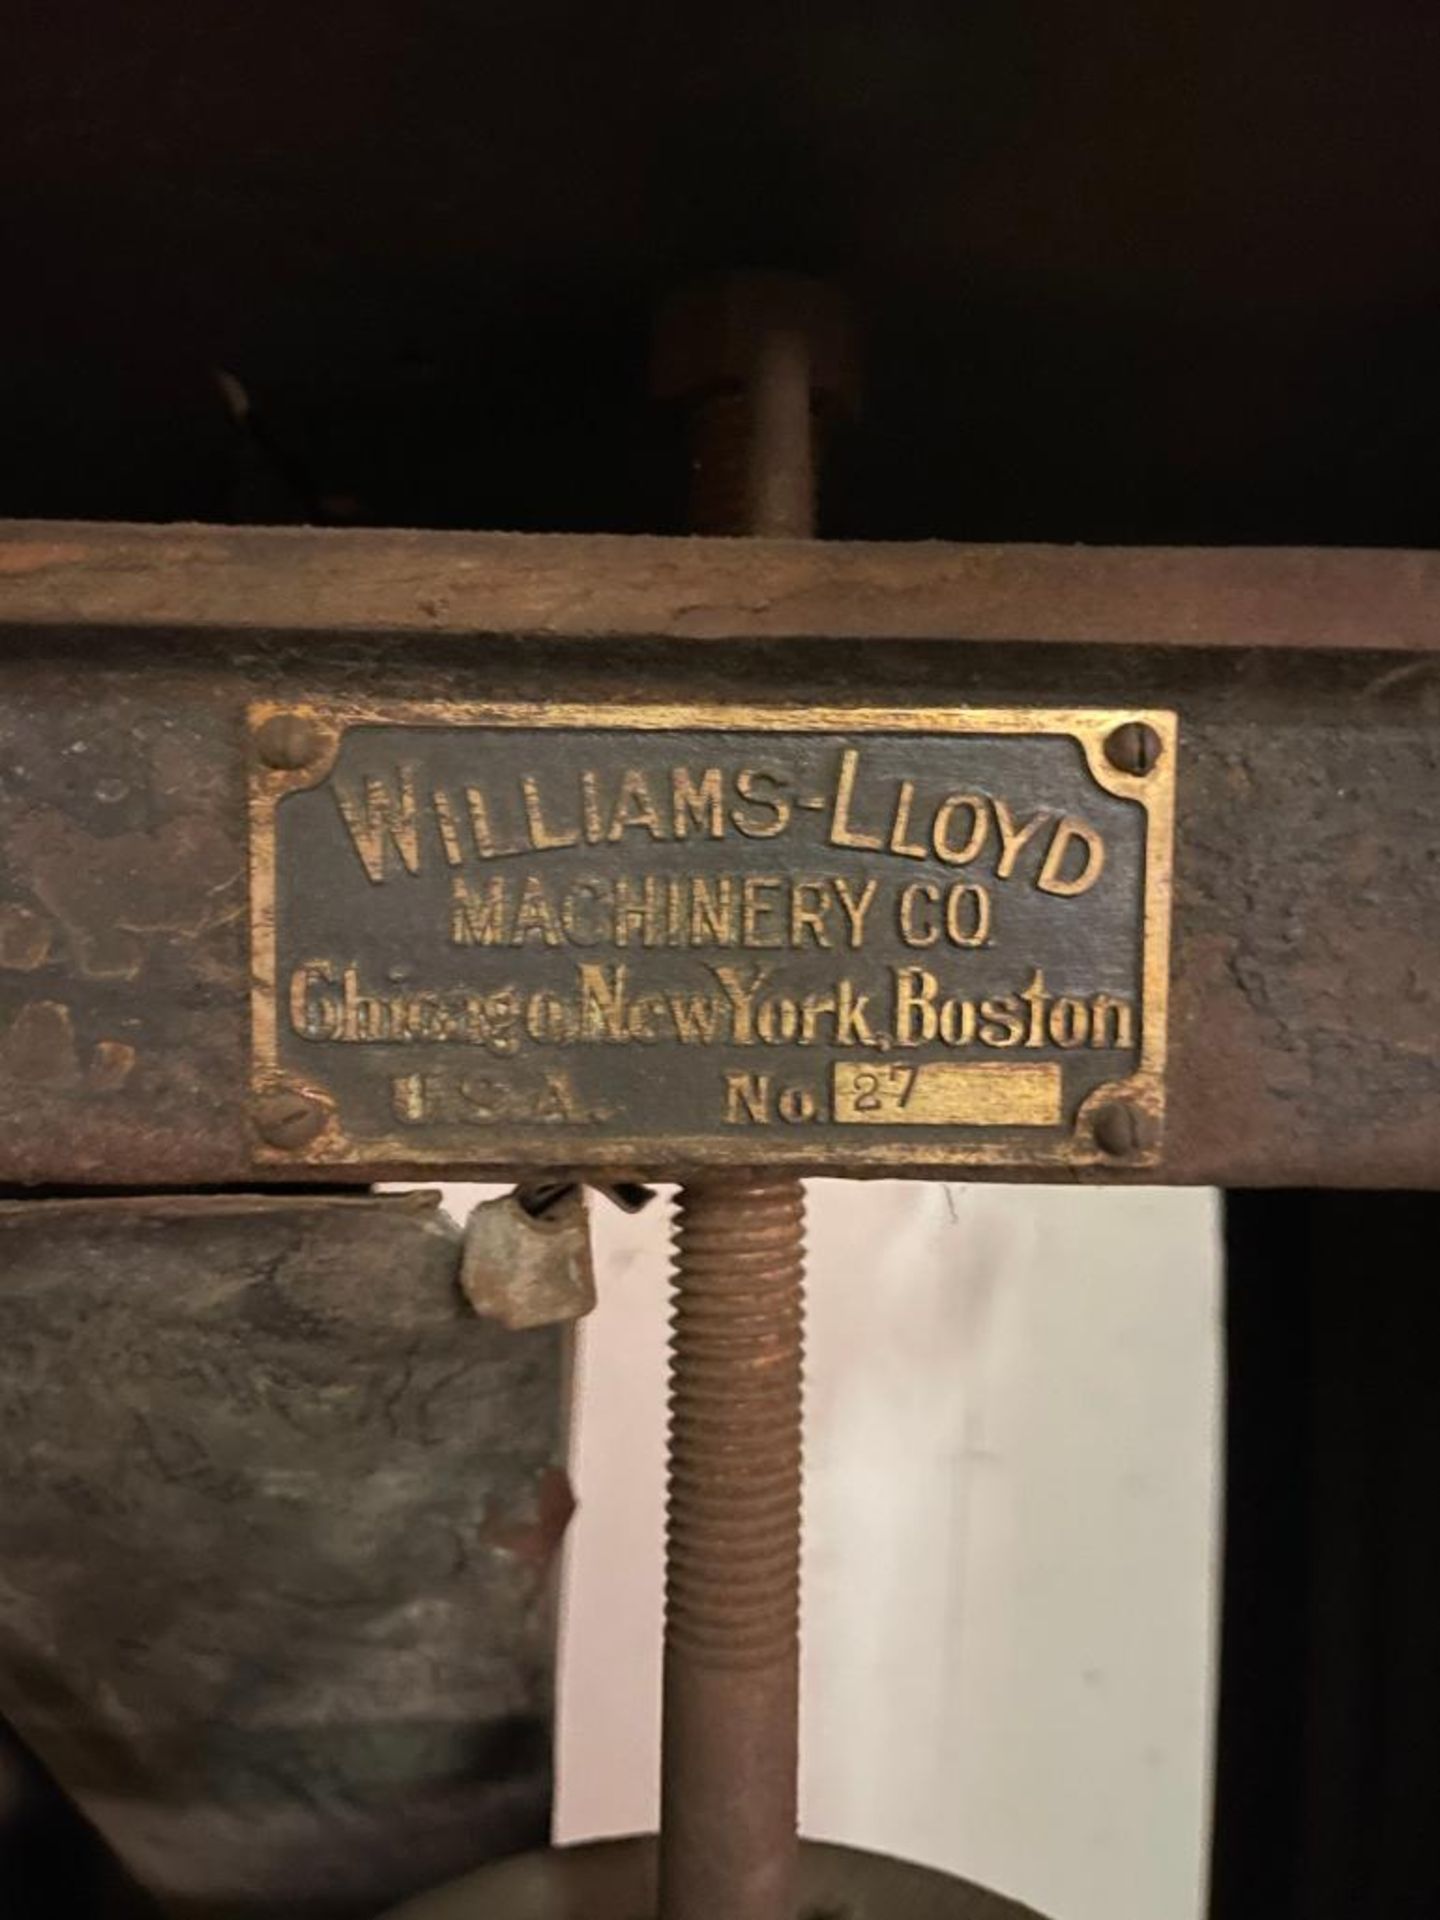 WILLIAMS LLOYD MACHINERY TABLE SAW ADDITIONAL INFO WORKING CONDITION UNKNOWN LOCATION PARTS ROOM QUA - Image 3 of 3